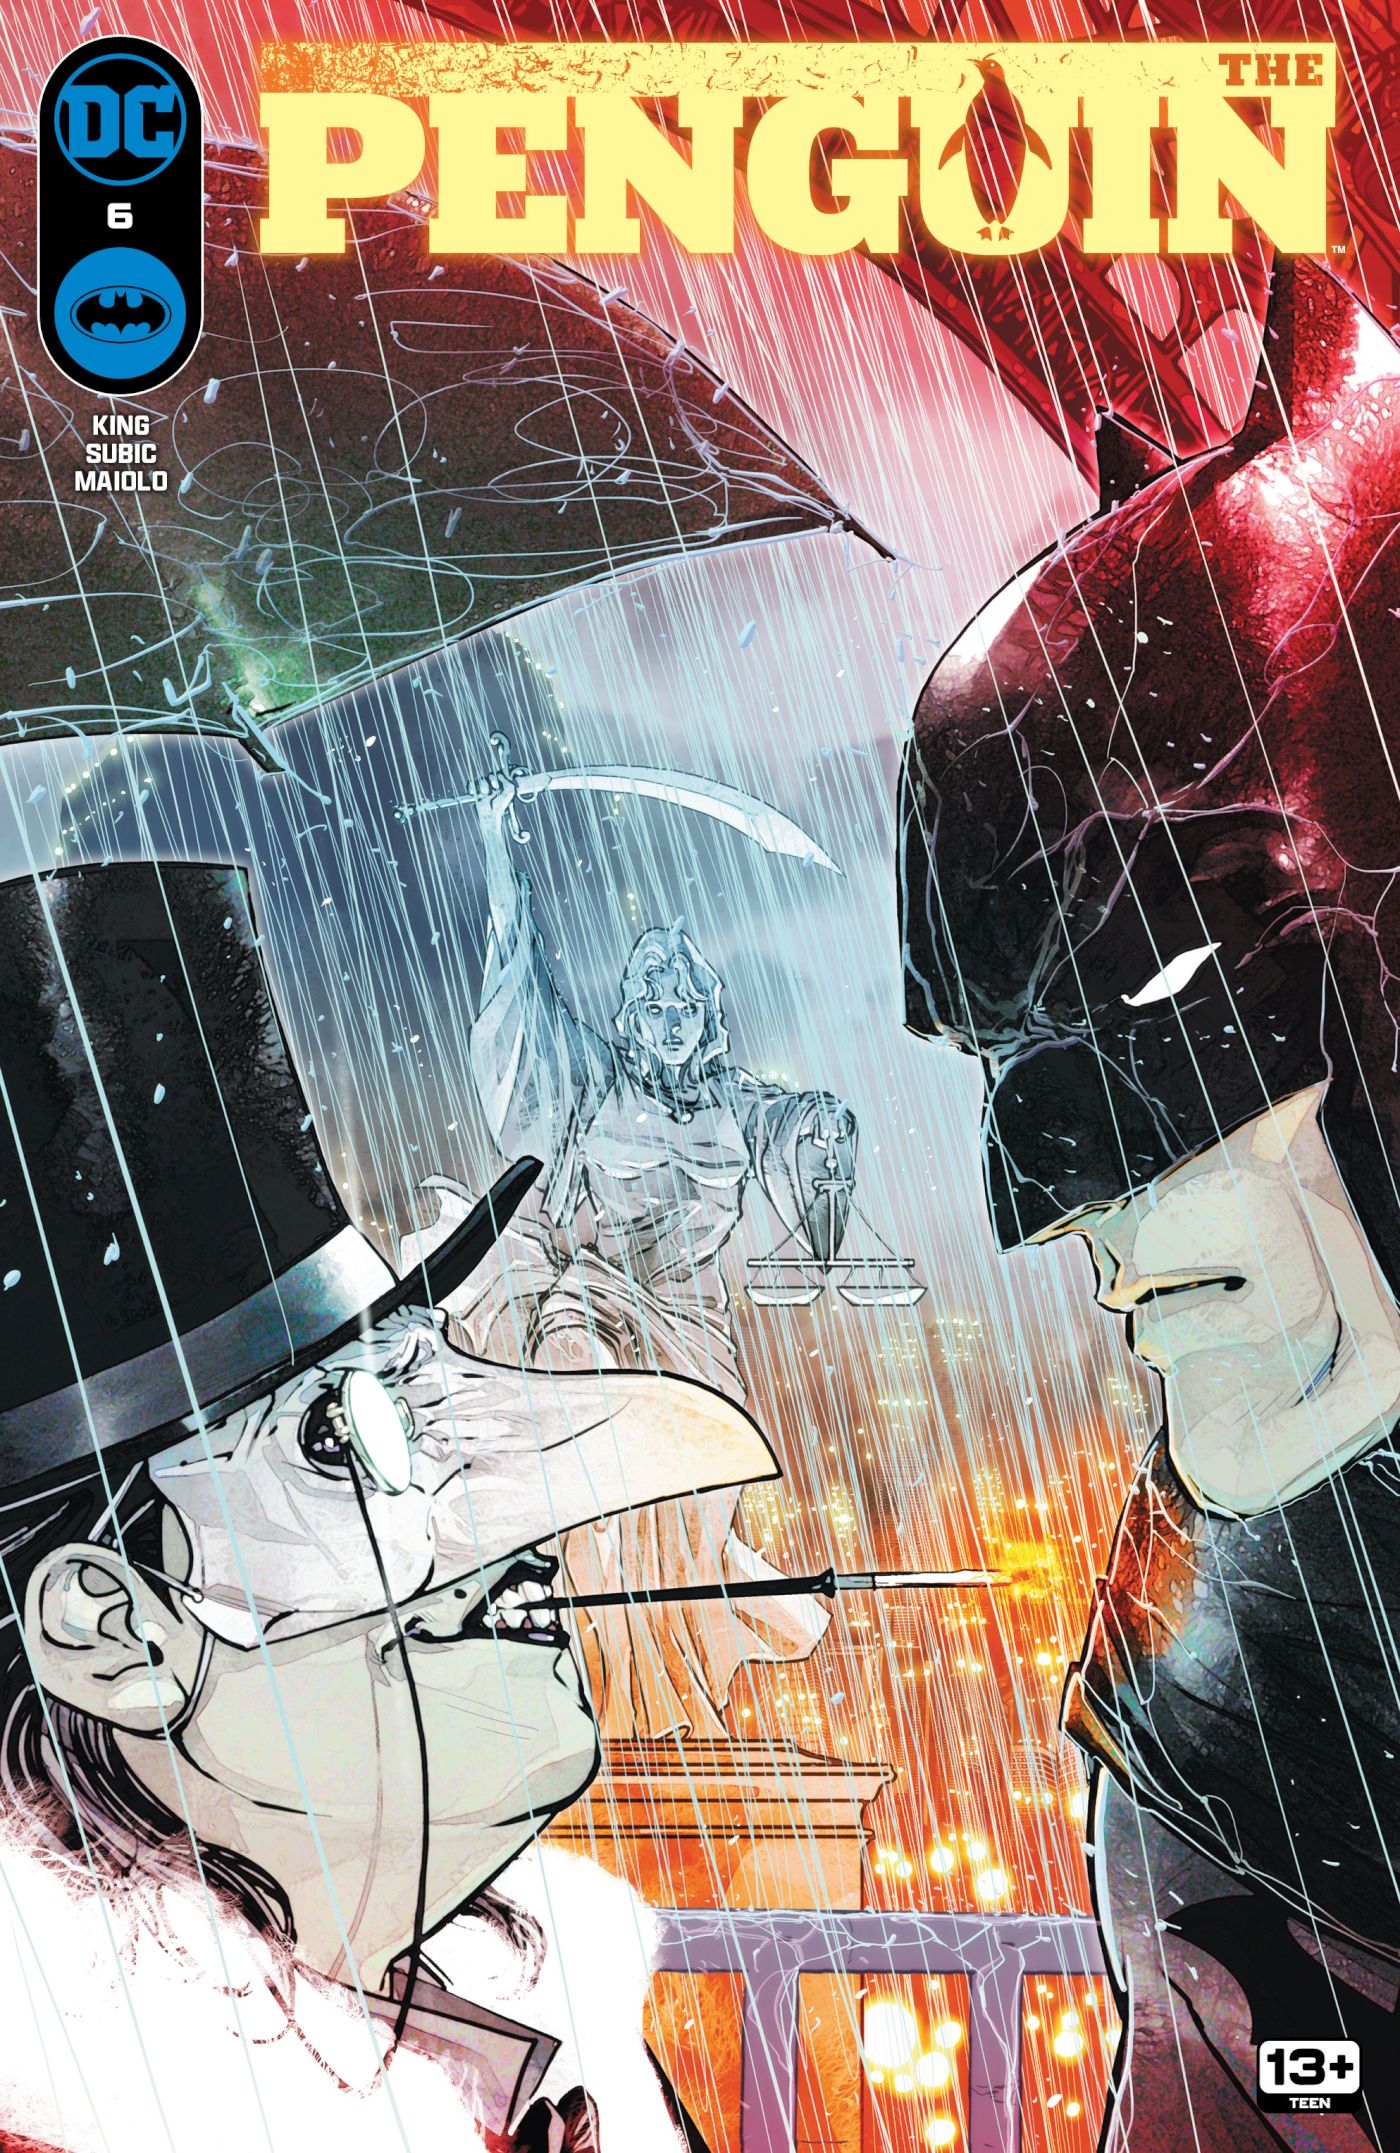 The Penguin 6 Main Cover: Batman and Penguin stare each other down in the rain.